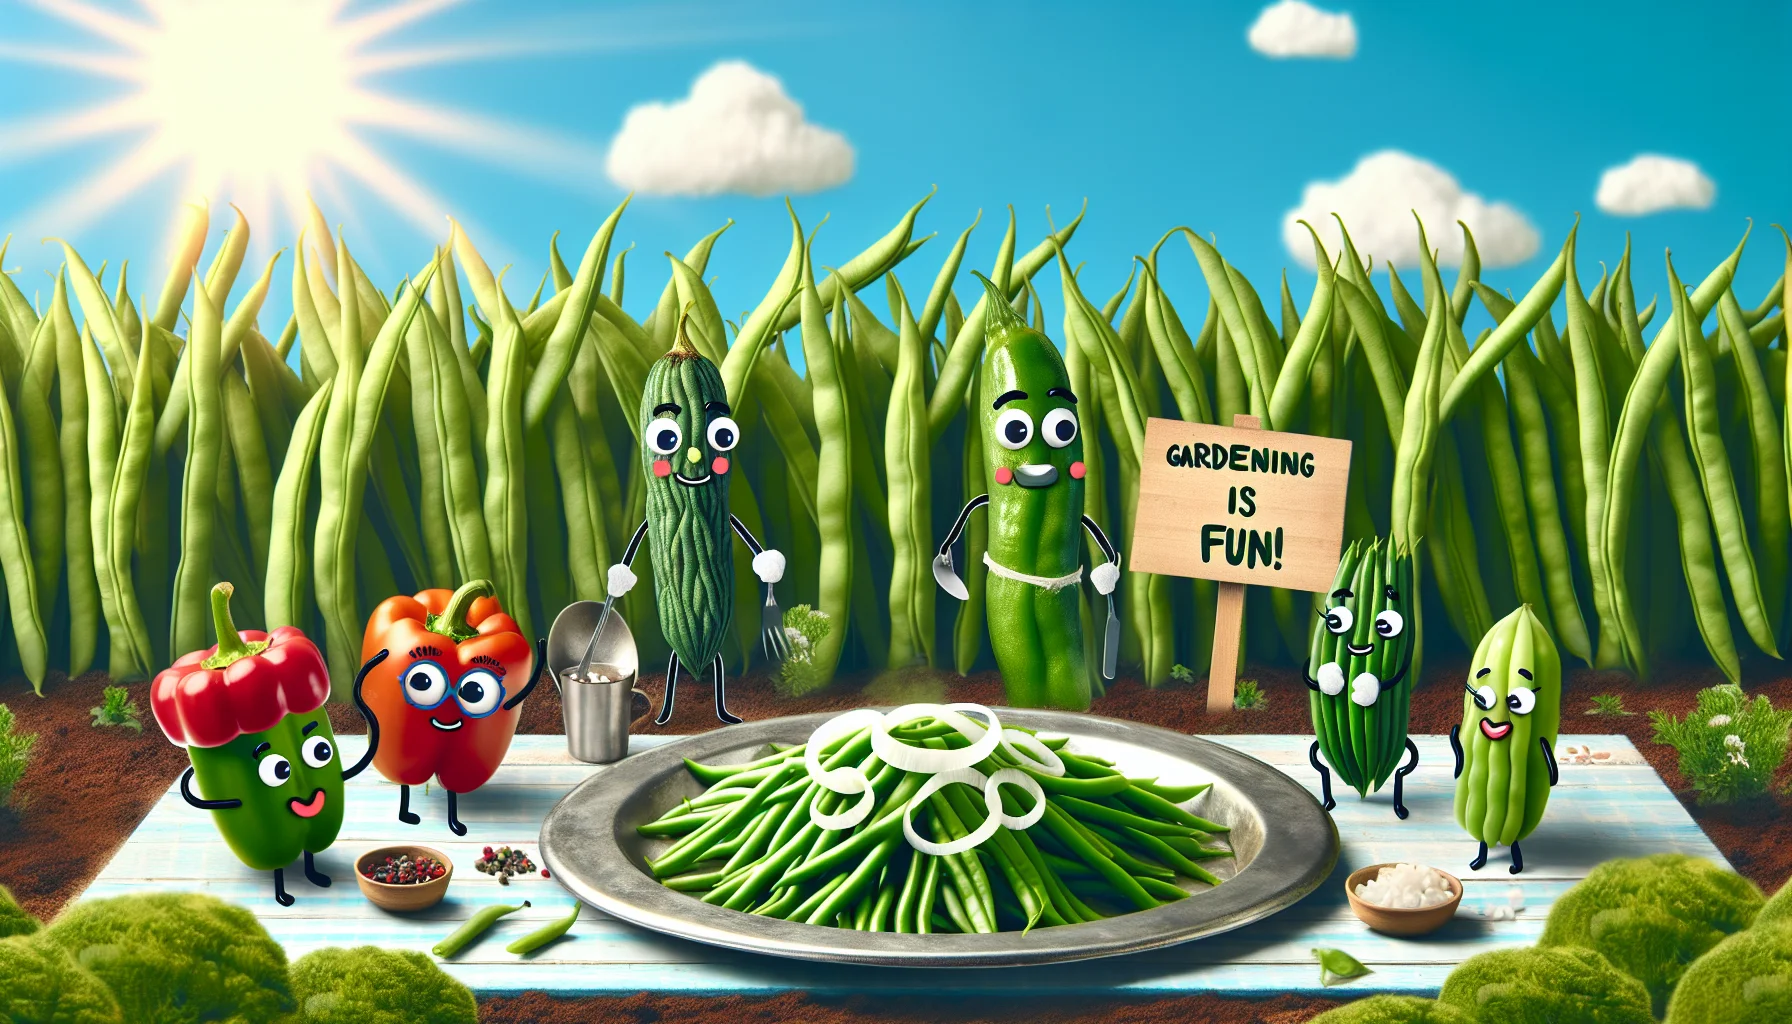 Create an image showcasing a hilarious scene of bright green beans sautéed with white onions served on a silver platter. The setup is a vibrant garden where plants sway slightly under a beaming sun in a clear sky. In the midst of this, a few caricatured personified vegetables, including a piquant pepper lady and a cutesy cucumber kid of unspecified descents, are encouraging others to engage in gardening. To the side, a small sign reads 'Gardening is Fun!' in quirky hand-drawn font style, nudging viewers softly towards taking up gardening.